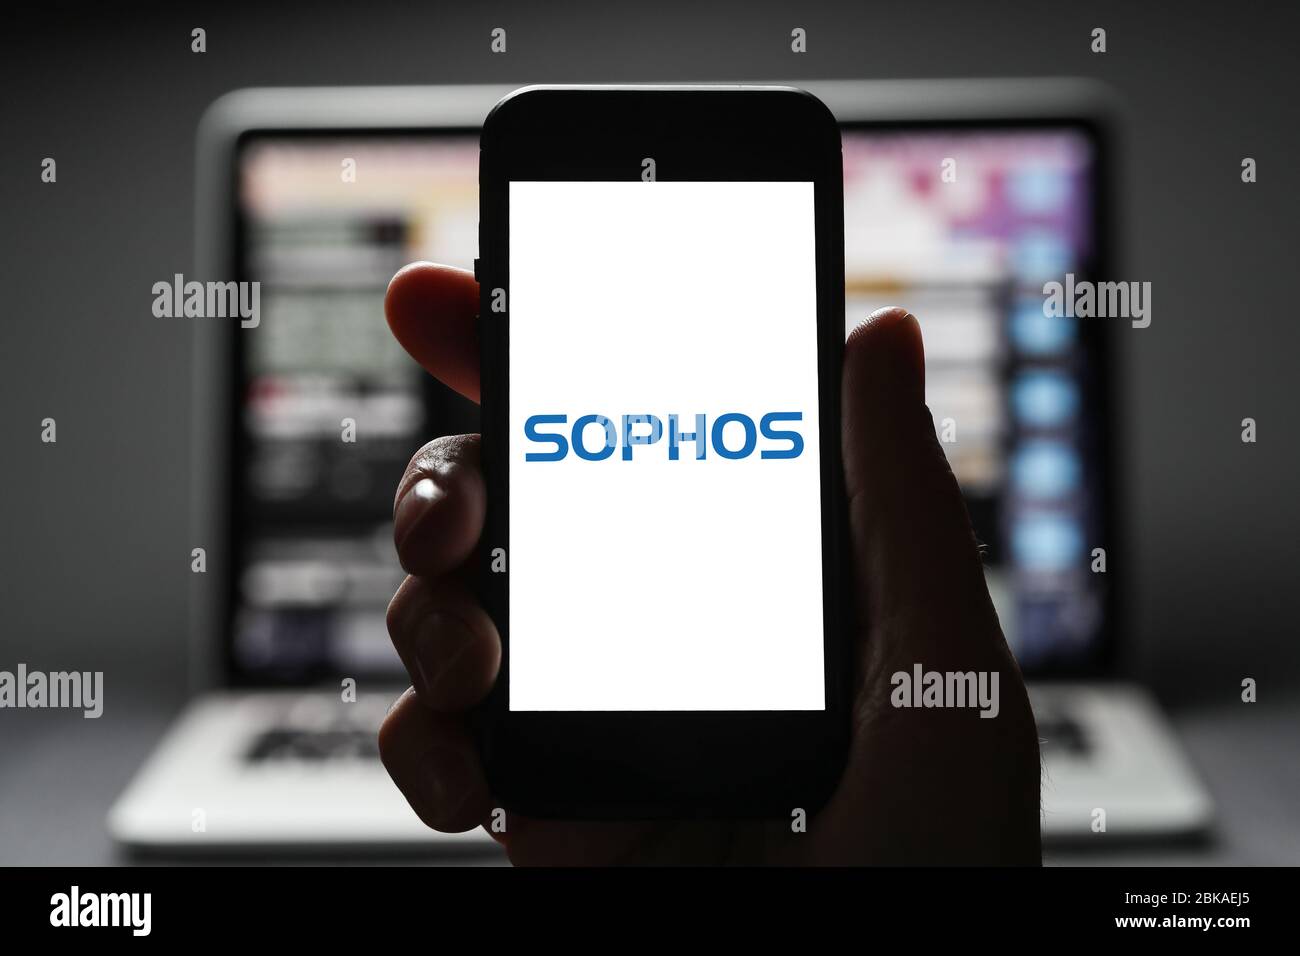 A man looking at the logo for Sophos on his iphone. Sophos is a cyber-security software development company. (Editorial Use Only) Stock Photo